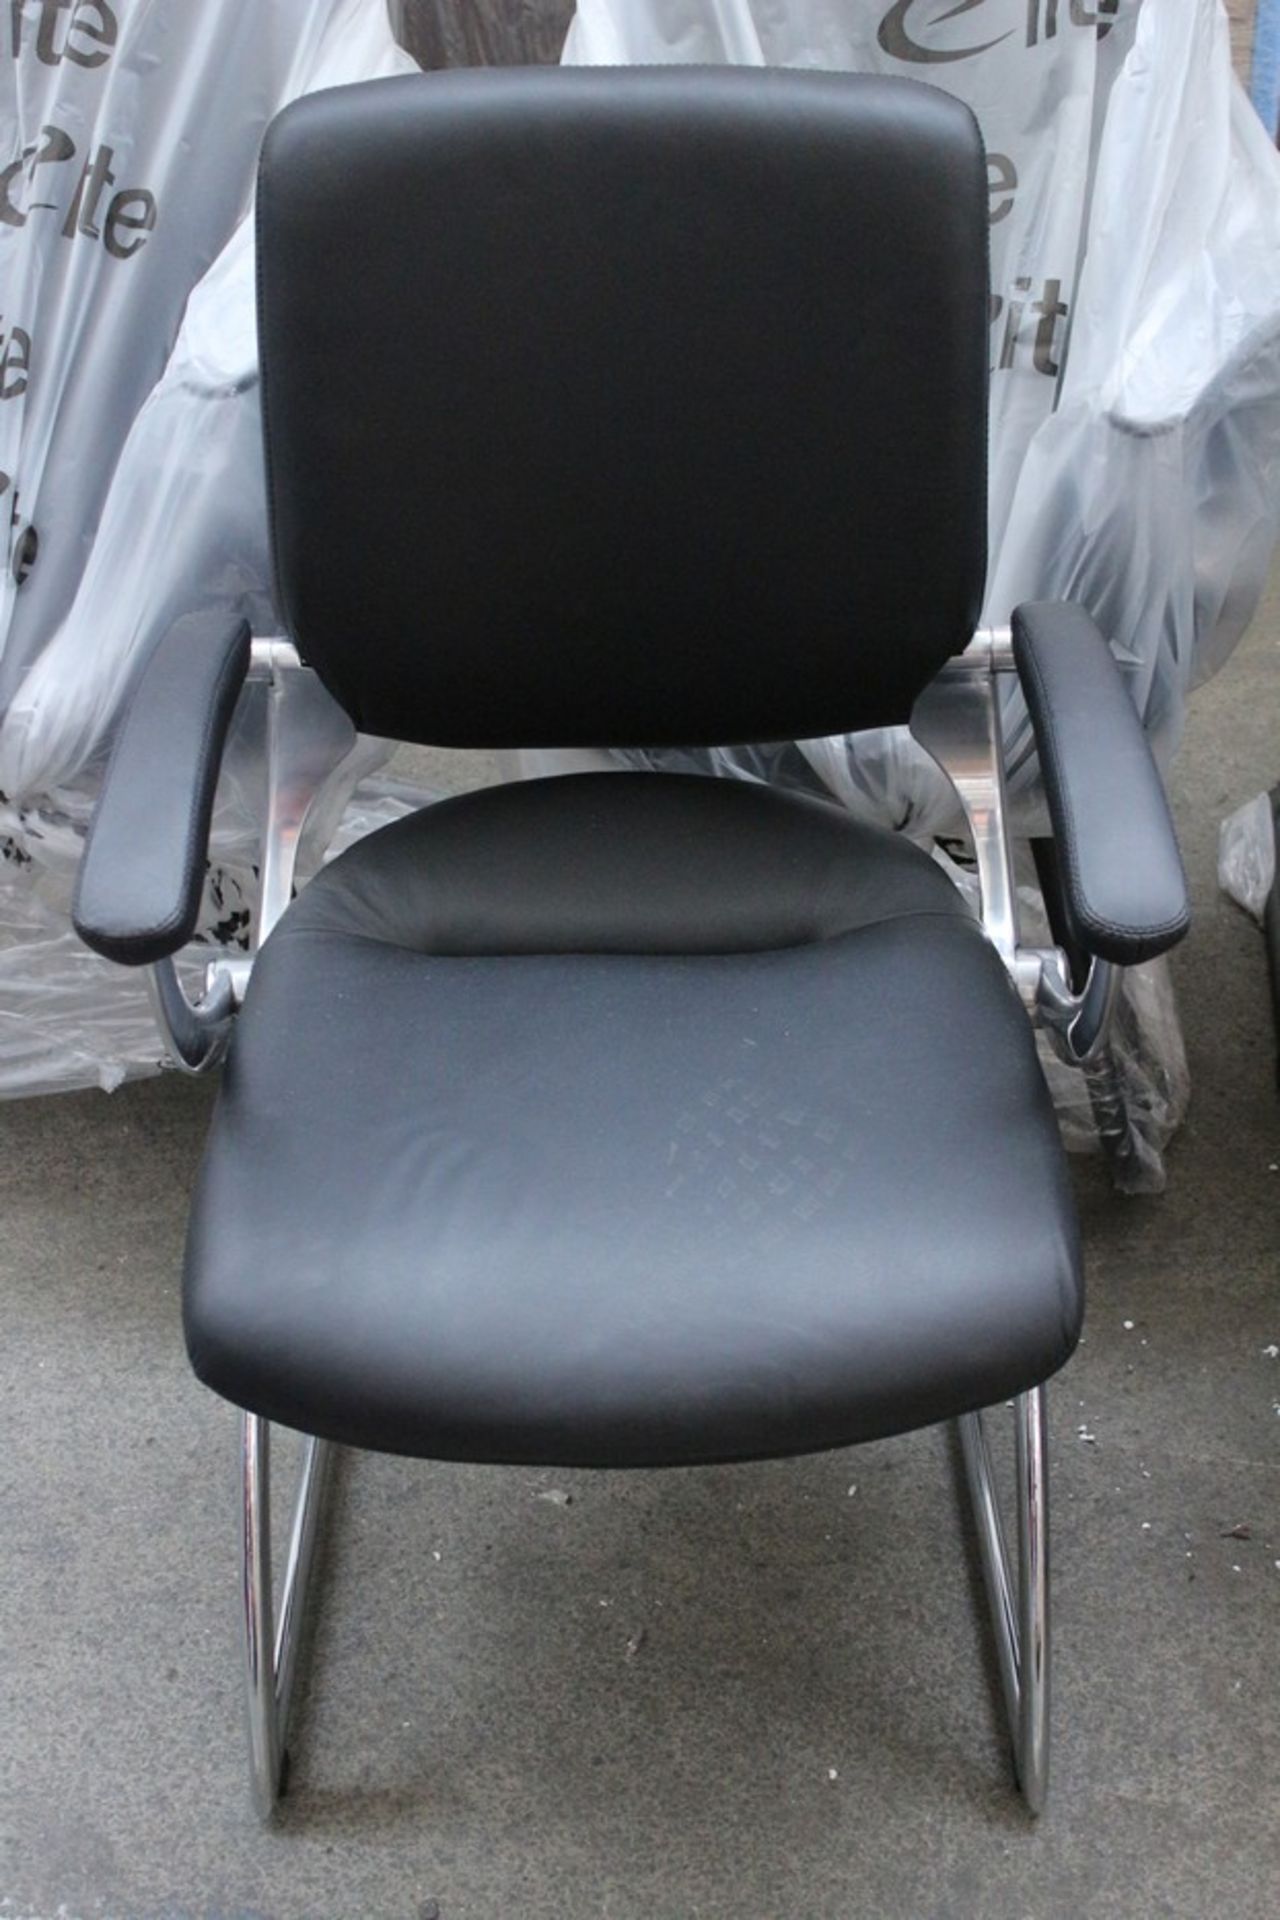 1 x BRAND NEW CANTELIVA MESH MEETING CHAIR RRP £250  *PLEASE NOTE THAT THE BID PRICE IS MULTIPLIED